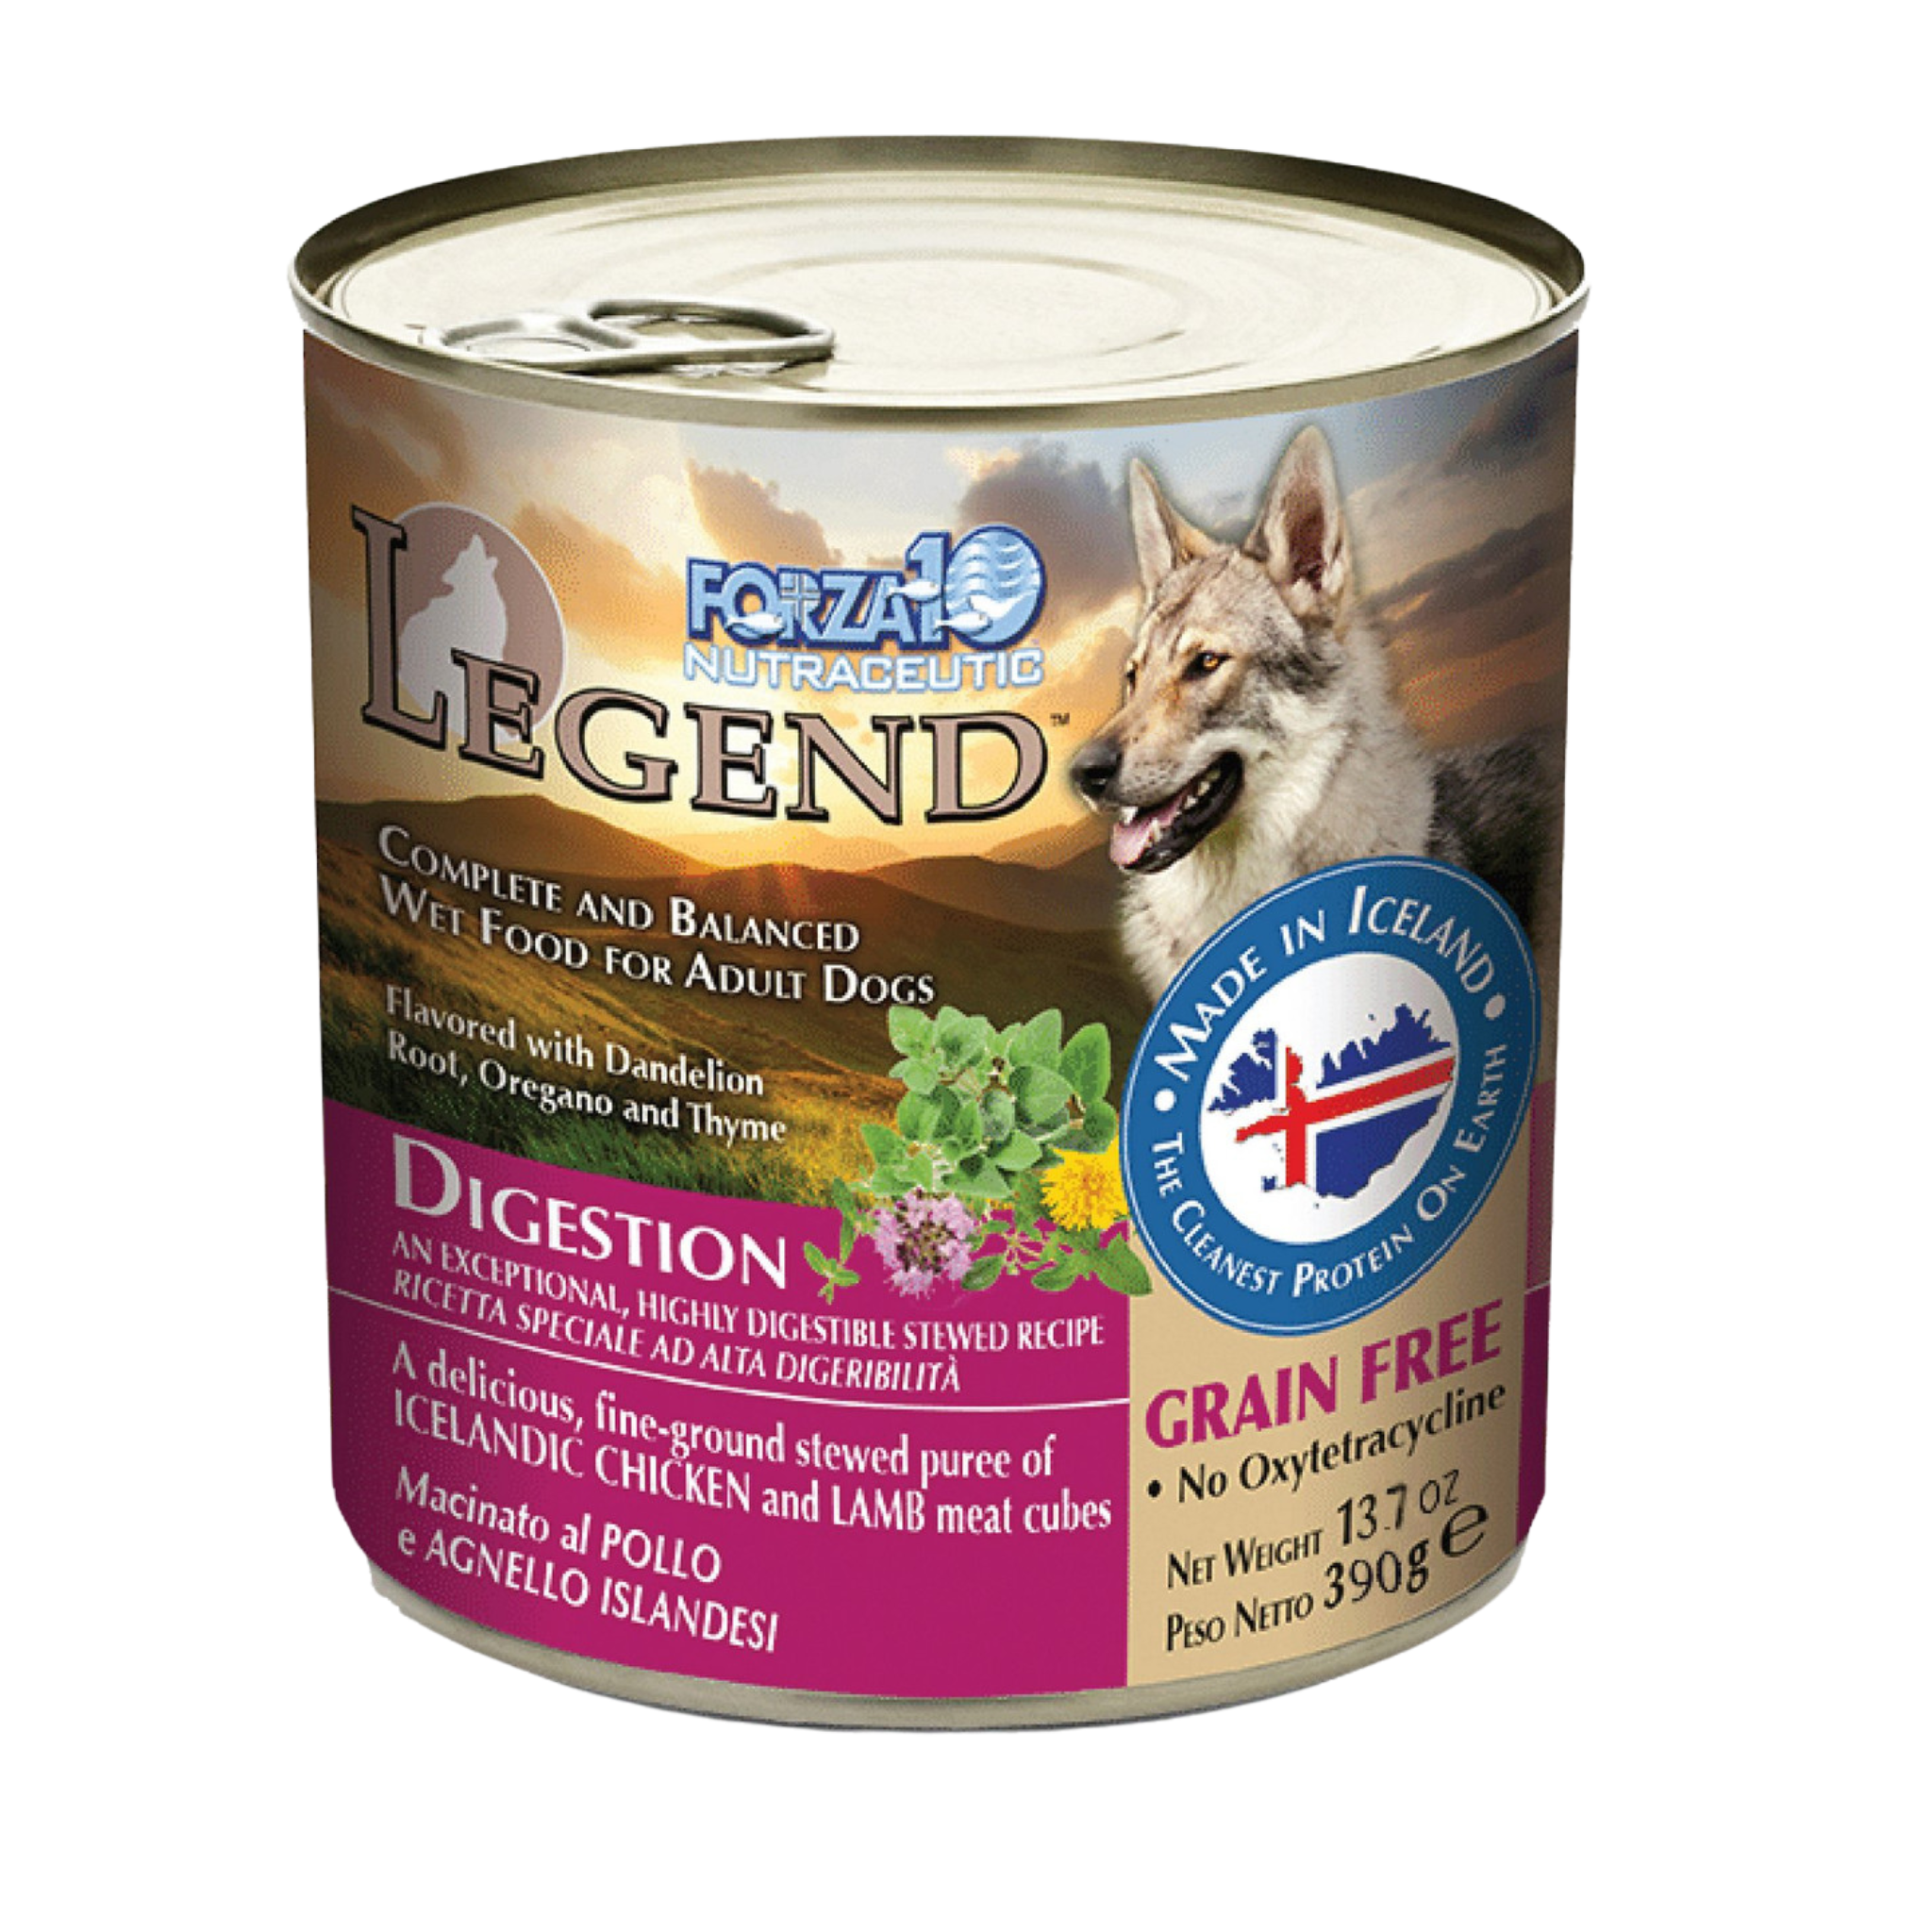 Forza10 Nutraceutic Legend Digestion Icelandic Chicken & Lamb Recipe Grain-Free Canned Dog Food 13.7-oz can - Mutts & Co.